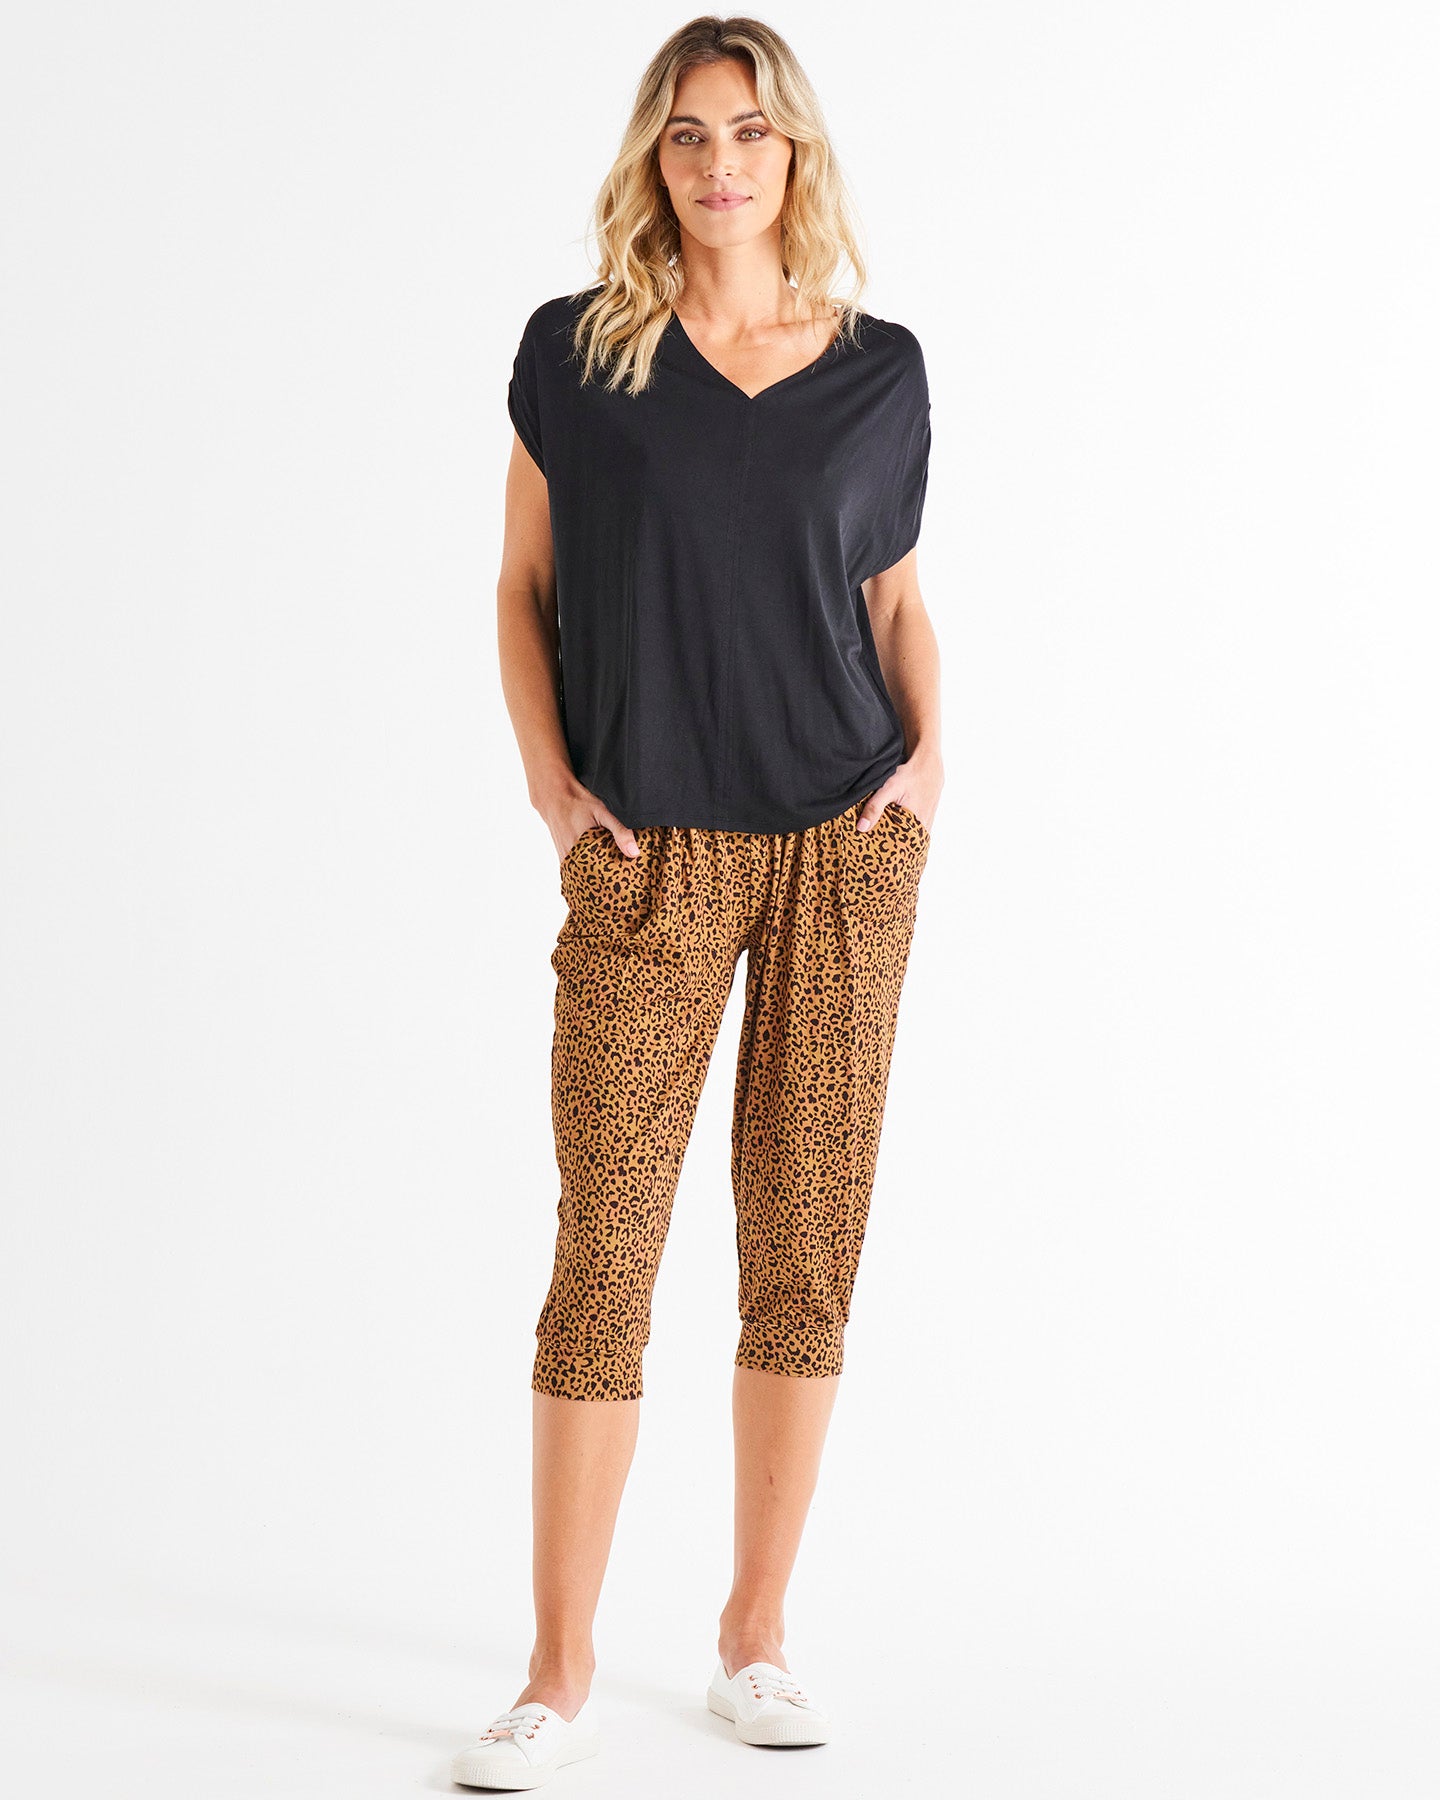 Tokyo Stretchy Mid-Rise Cropped 3/4 Jogger Pant - Wild Leopard Print